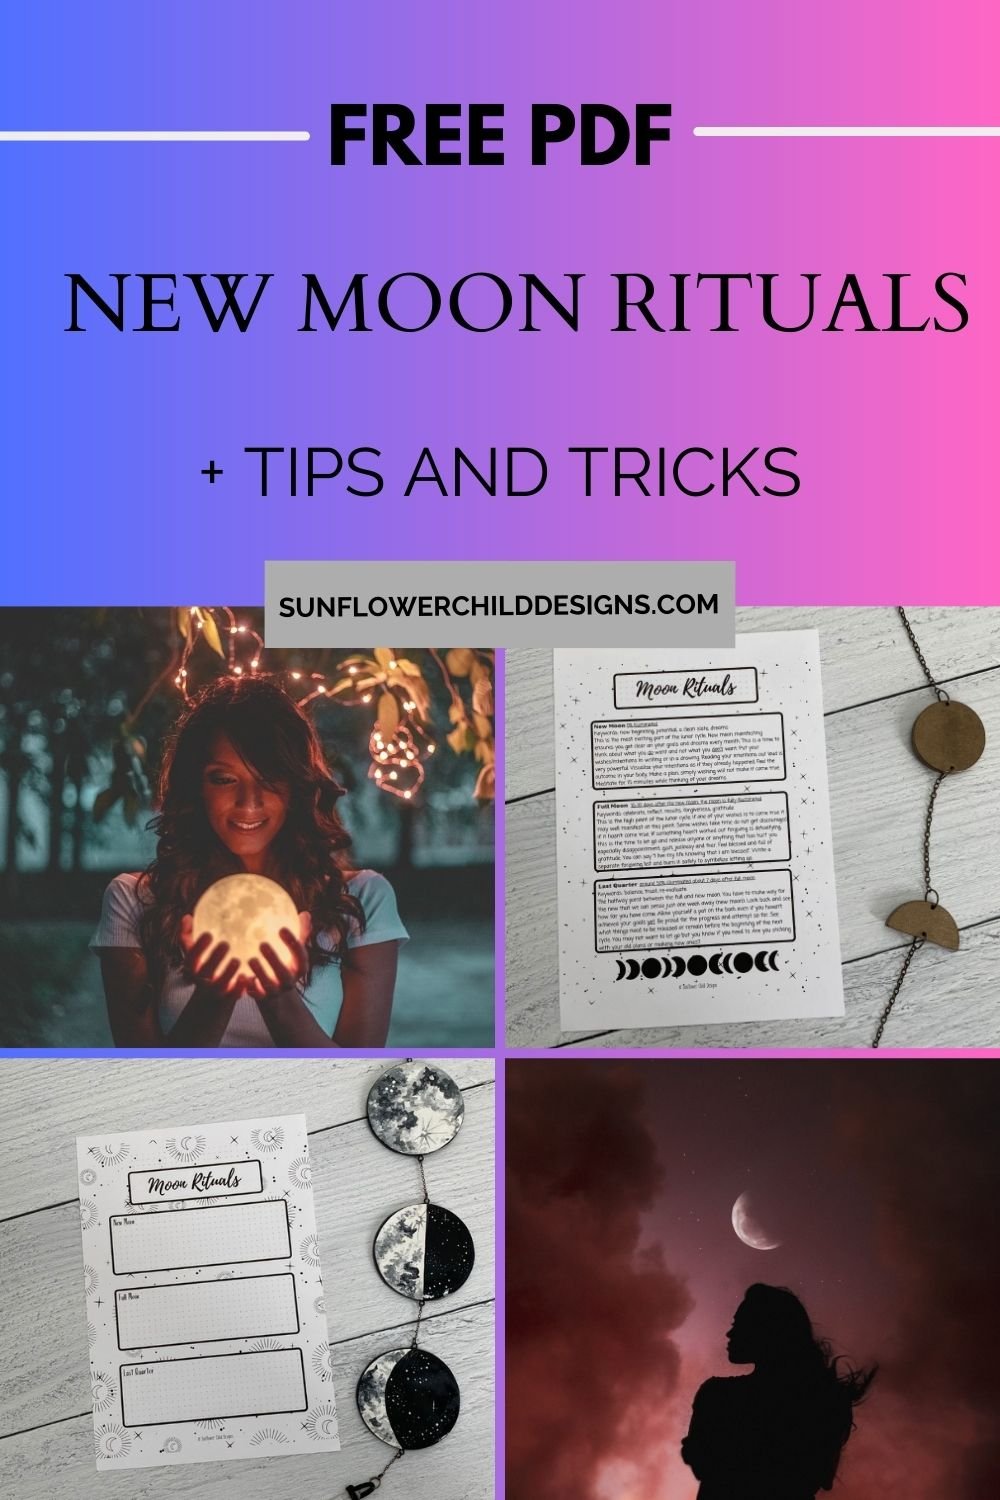 Manifest Your Dreams with New Moon Rituals